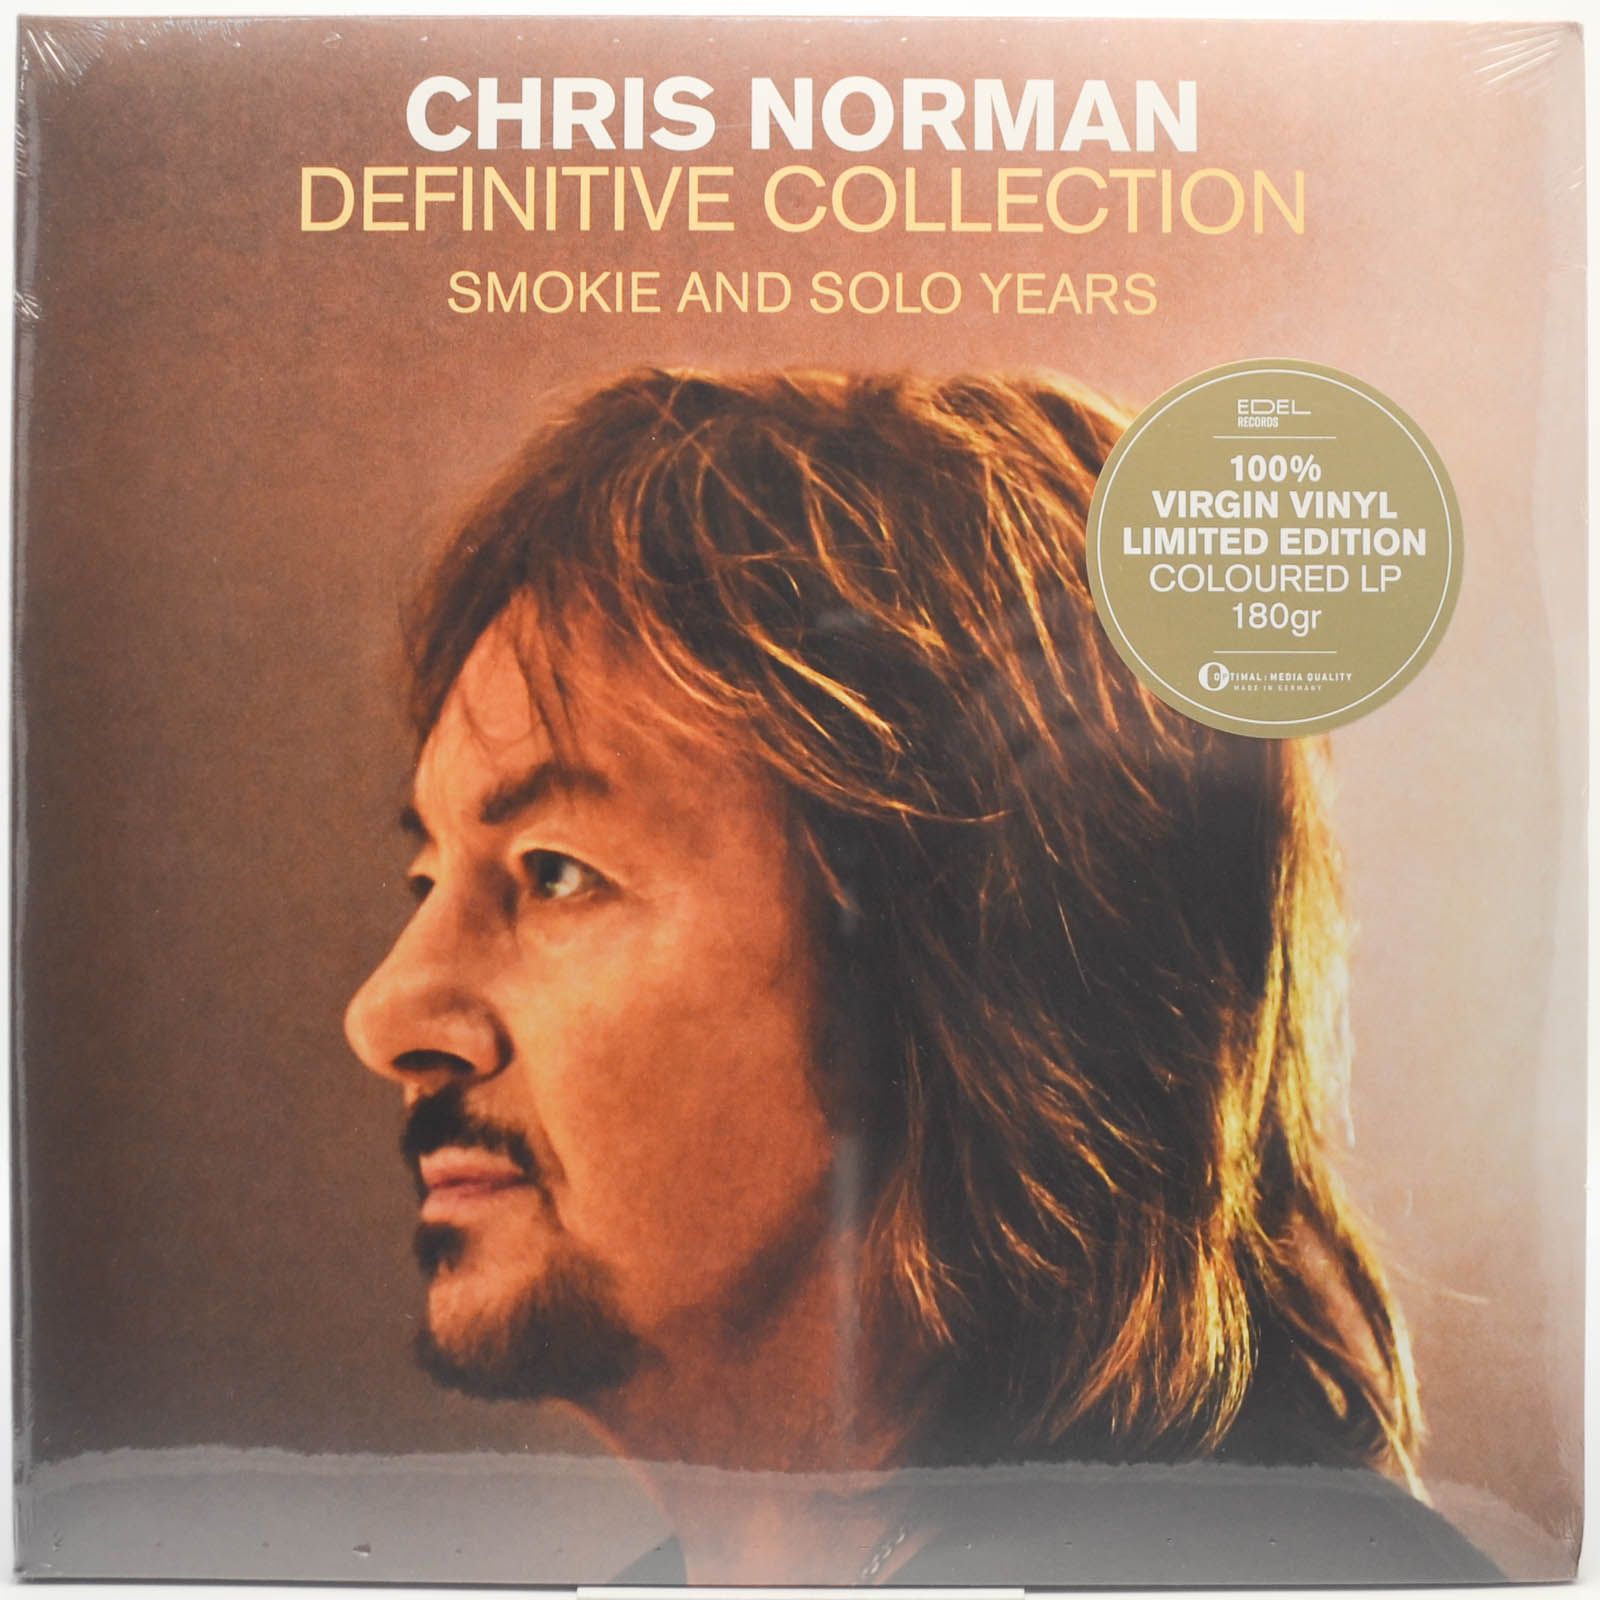 Chris Norman — Definitive Collection (Smokie And Solo Years) (2LP), 2018